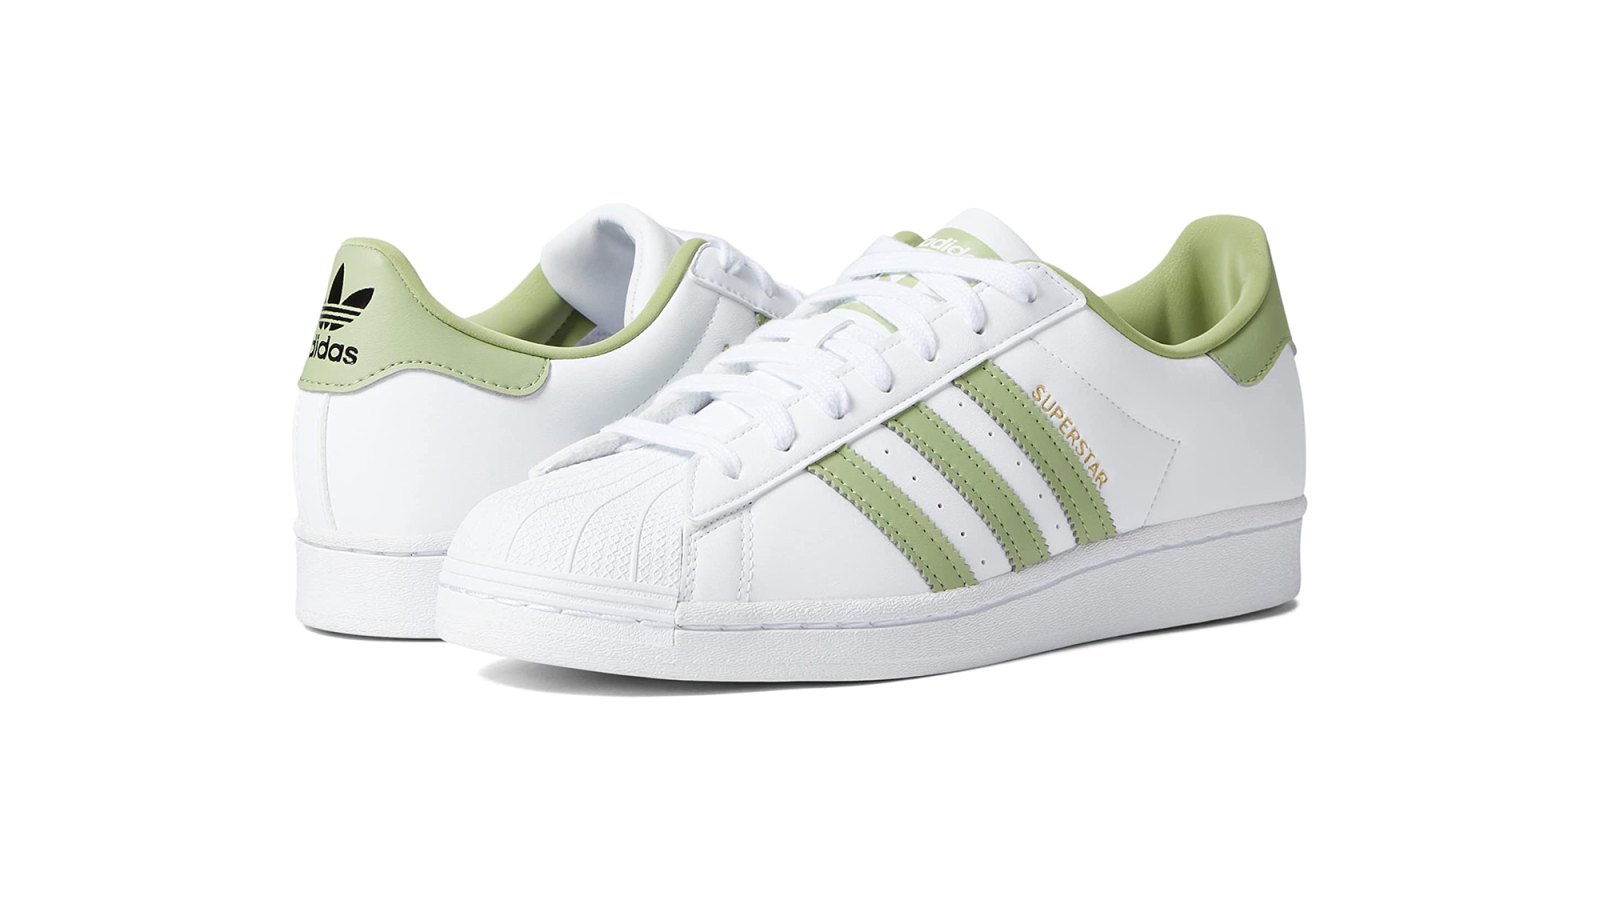 Adidas Classic Sneakers Have a Pop of Color That\'s Ideal for Spring | Us  Weekly